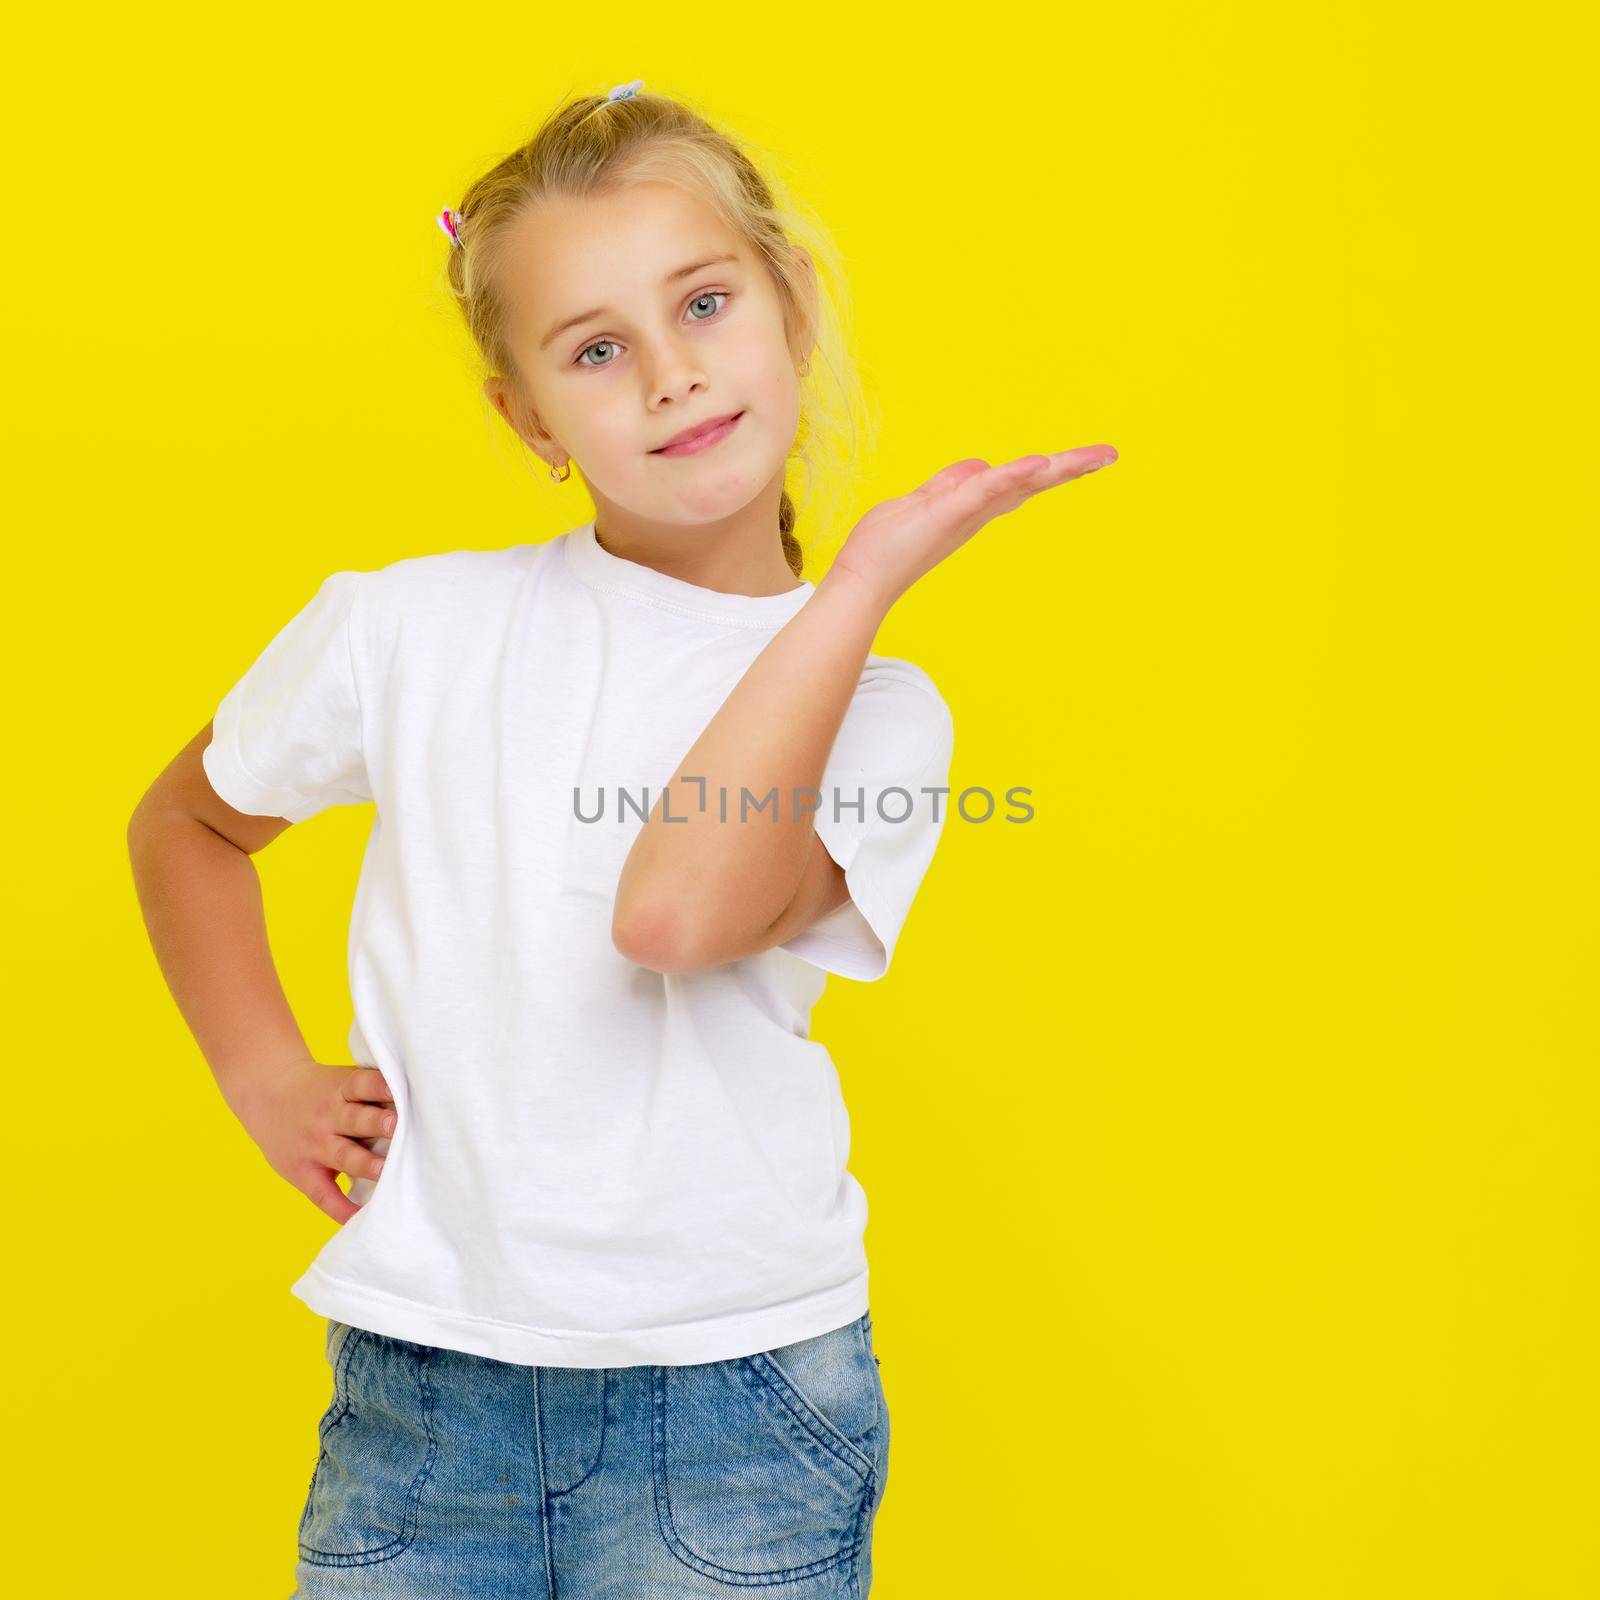 Emotional little girl in a clean white T-shirt. The concept can be used to advertise goods and services, whose logo can be printed on the surface of the shirt.On a yellow background.